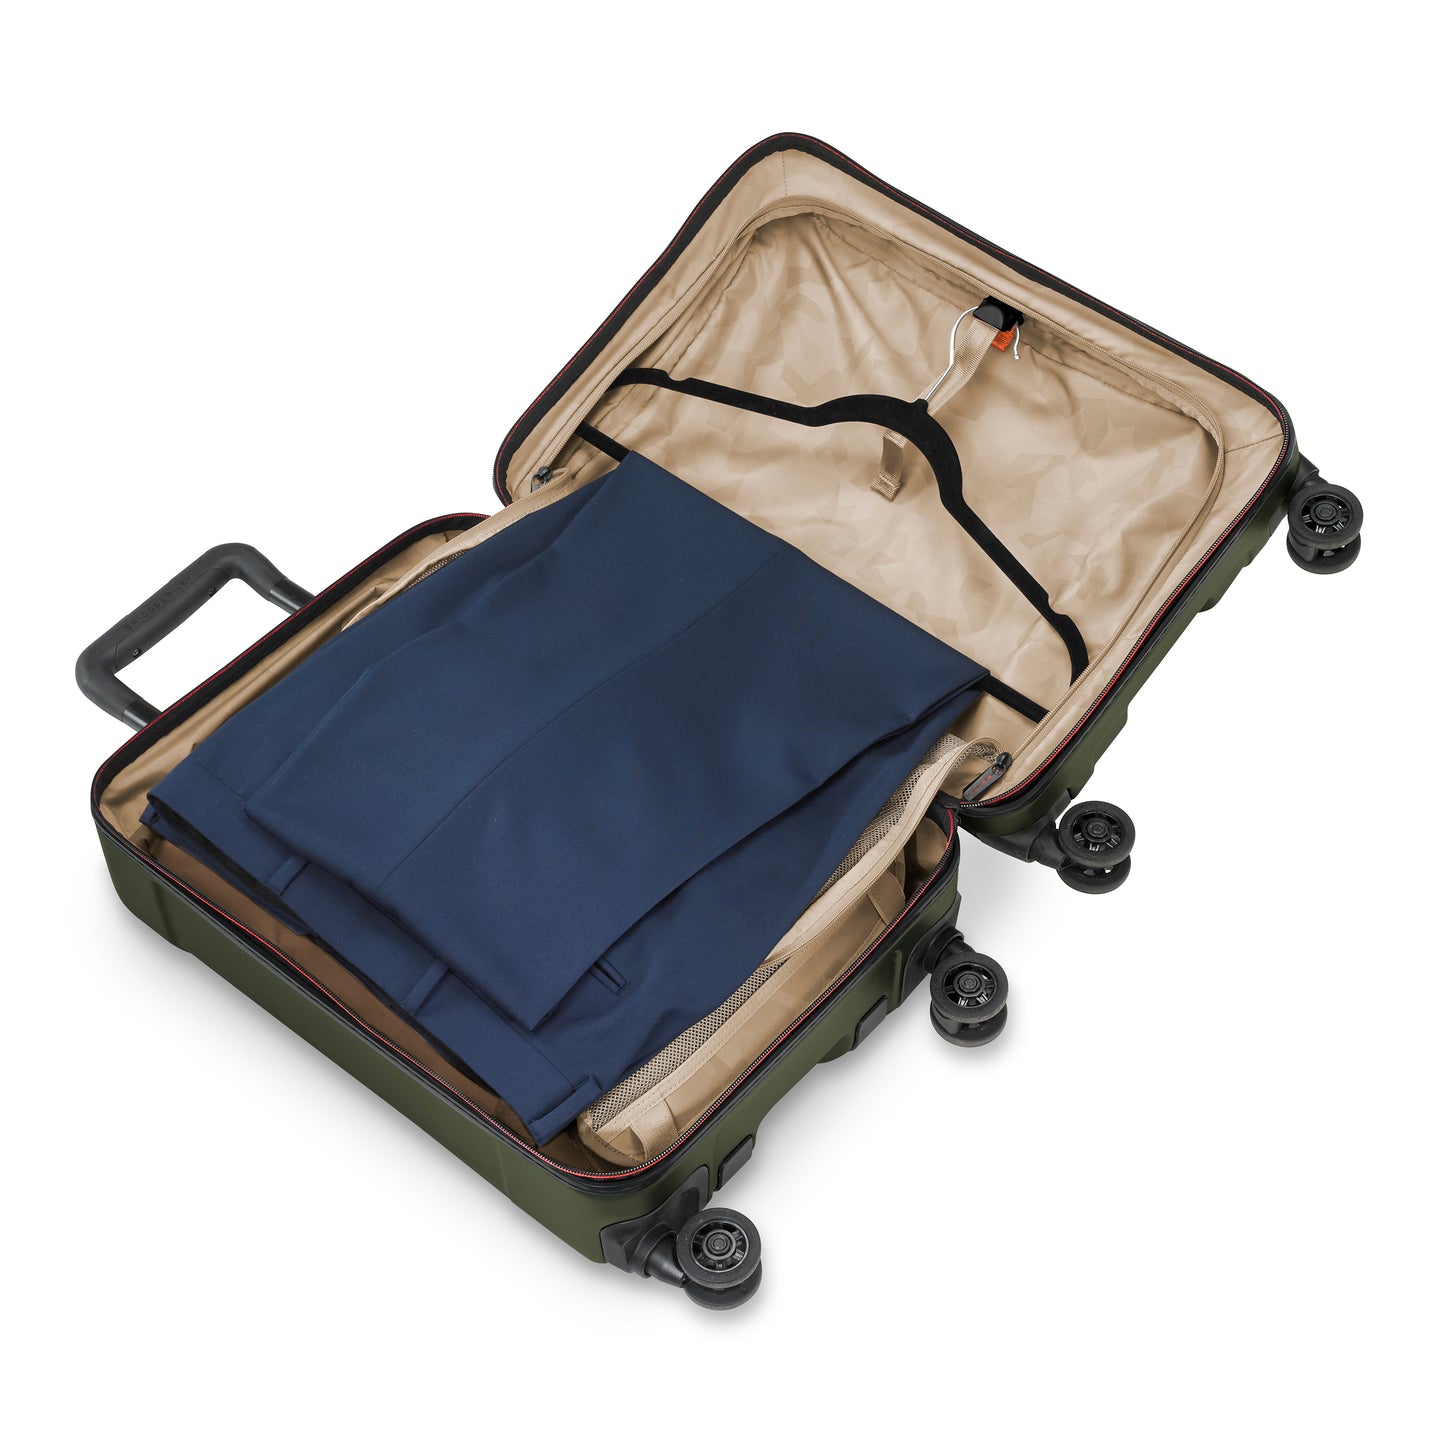 Briggs & Riley TORQ Hardside 22" (US Size) Carry-On Spinner Suitcase